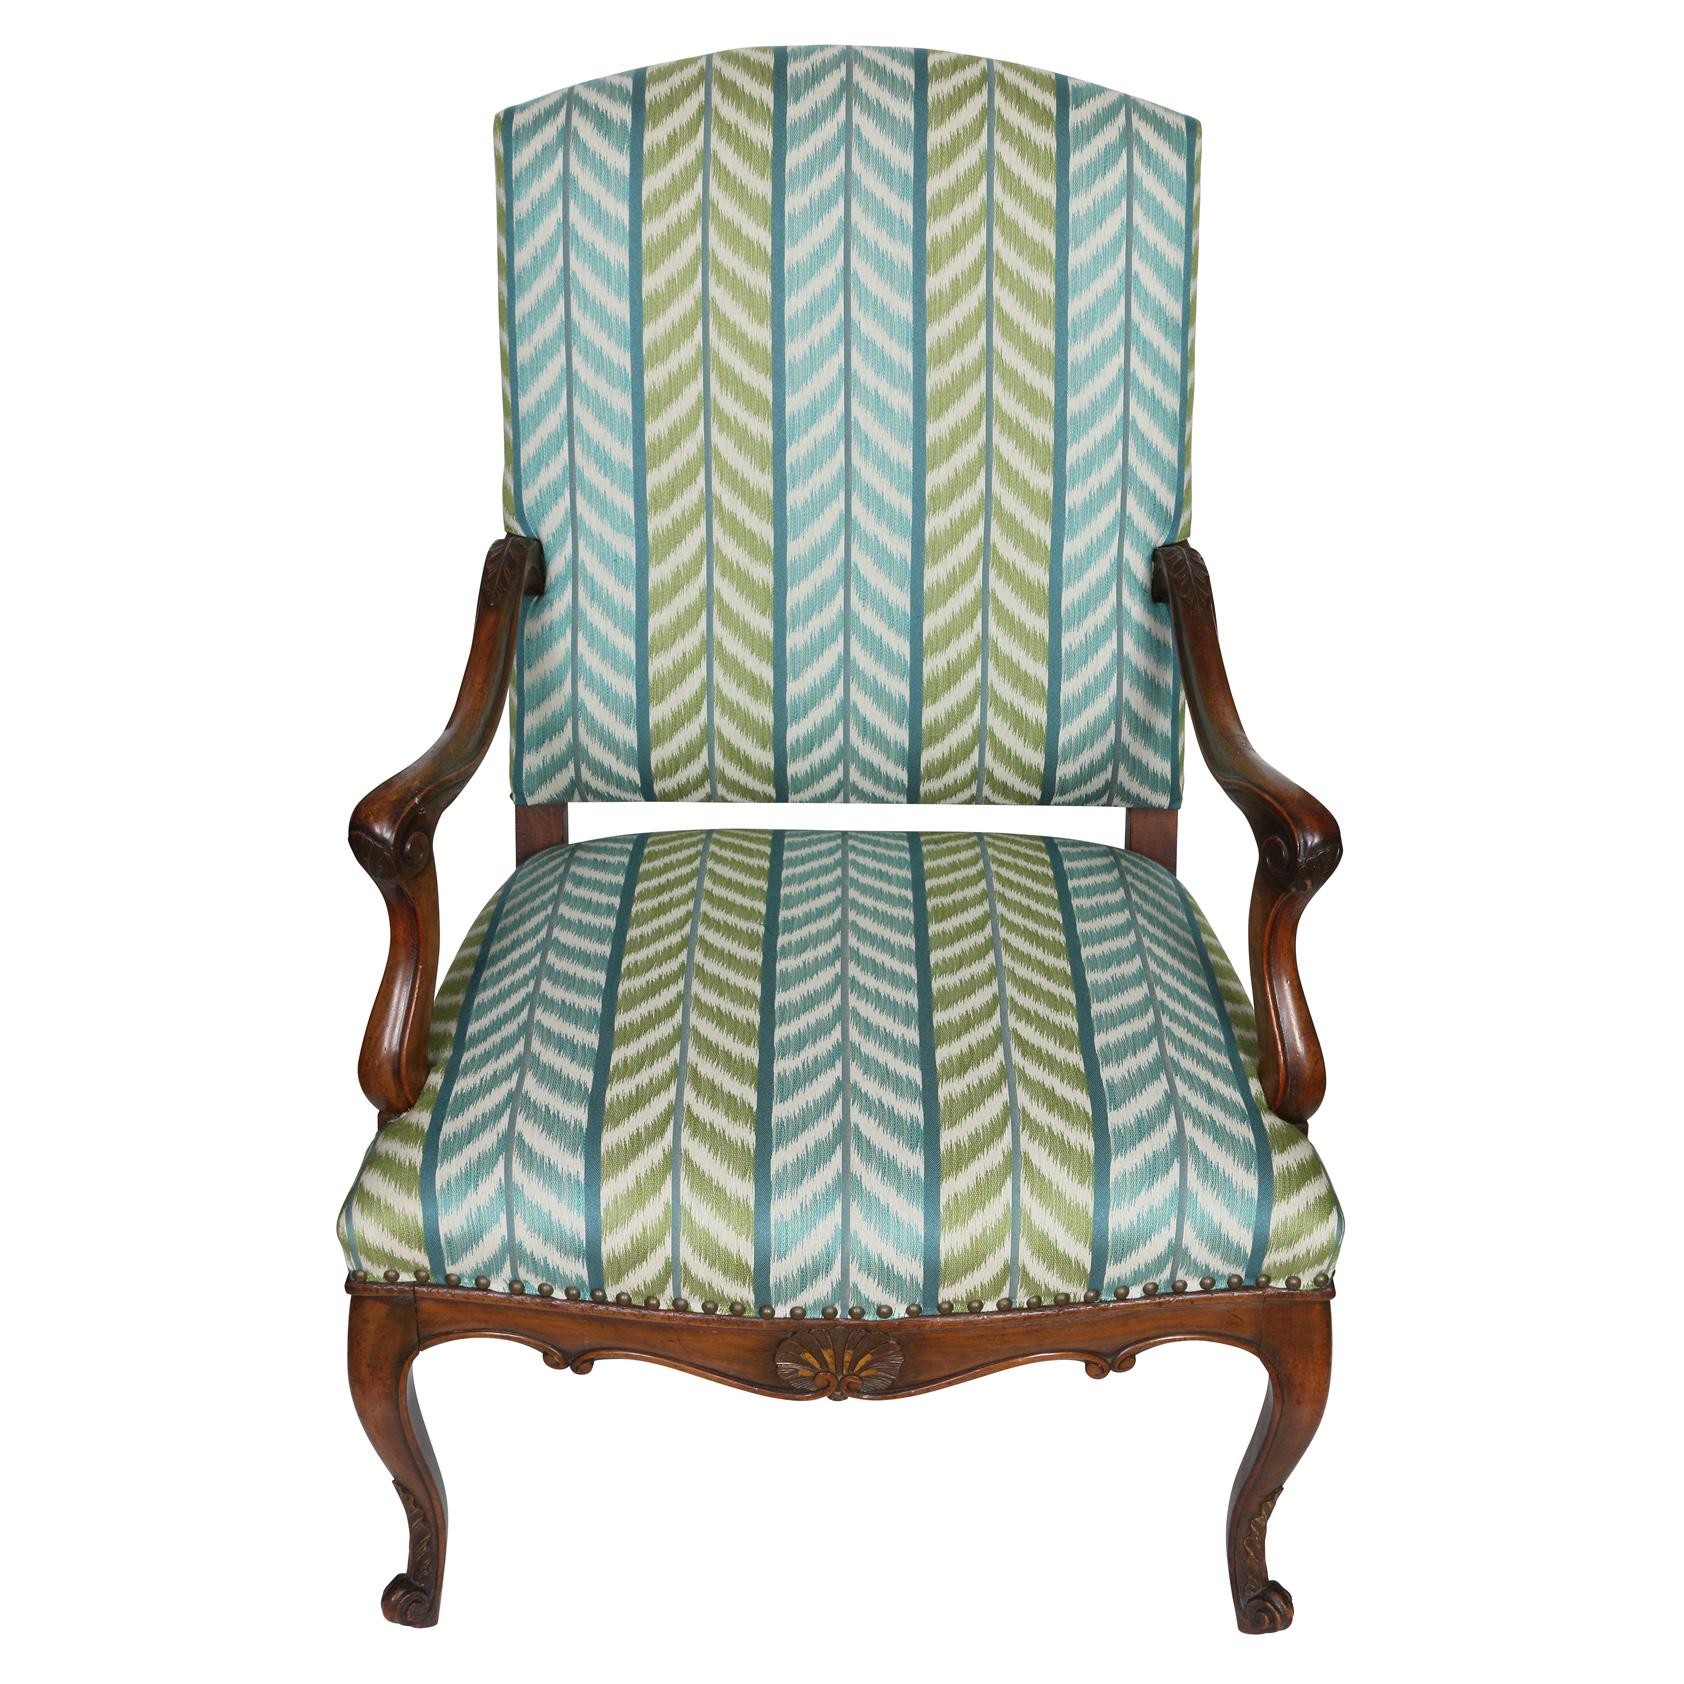 A pair of walnut Regence style chairs newly upholstered with Quadrille fabric in a blue and green chevron print.  The upholstered fauteuil chairs are finished with nail head trim to the seat. The arms and cabriole legs are beautifully carved with a